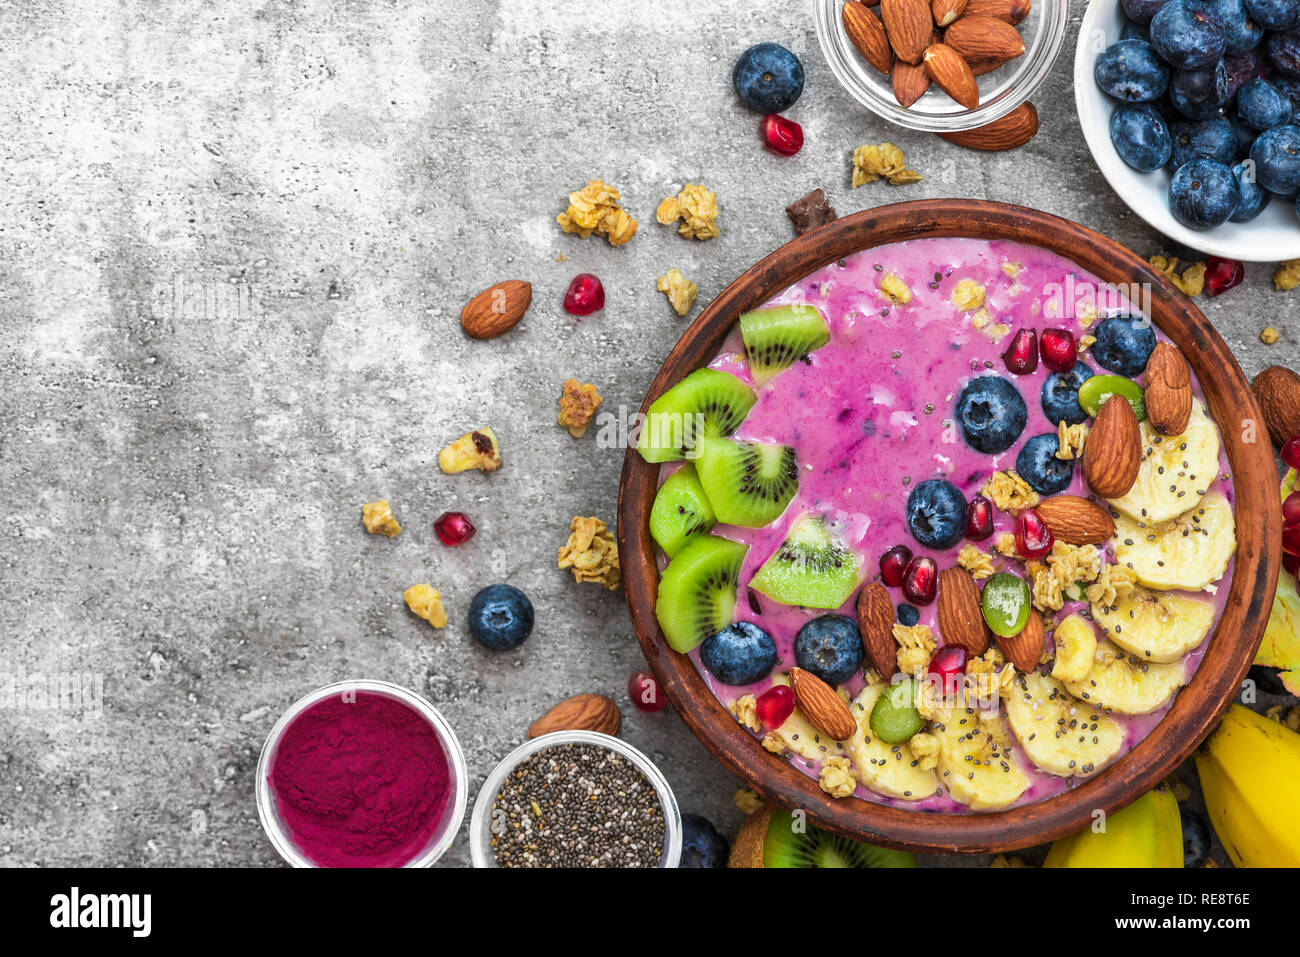 Healthy breakfast. acai smoothie bowl with blueberry, fruits, granola, almonds, pumpkin and chia seeds. detox food concept. top view with copy space Stock Photo